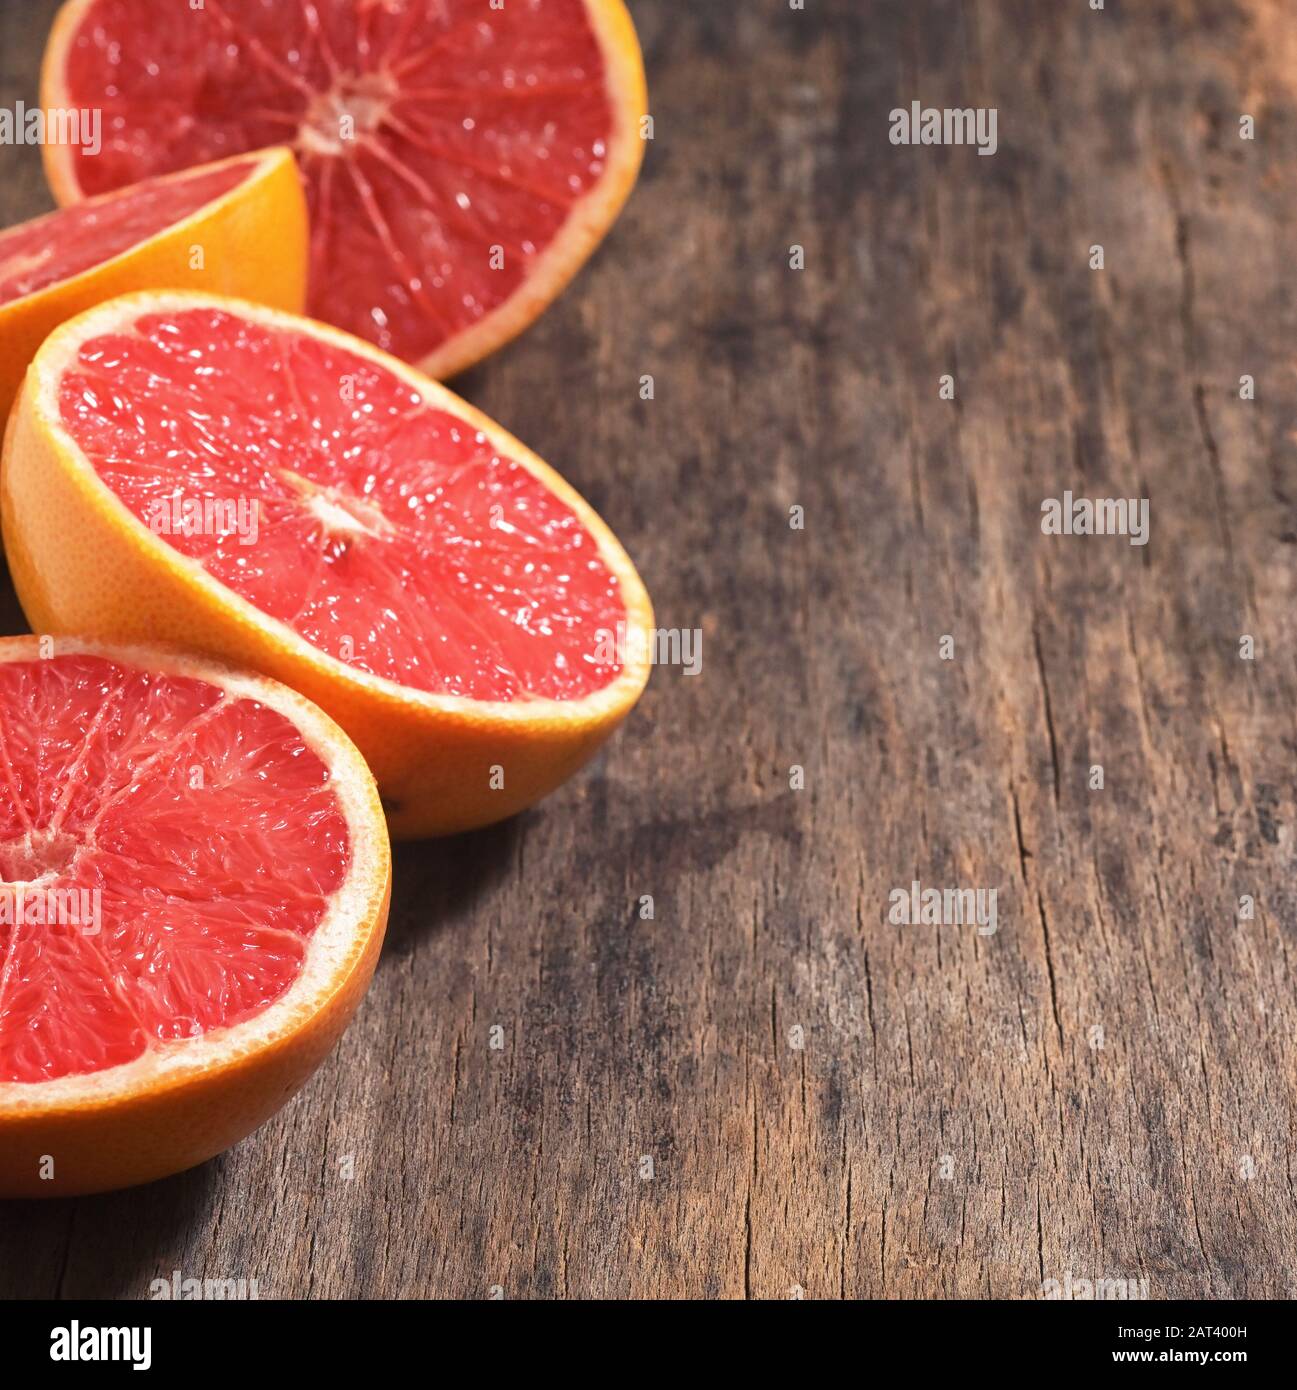 Sliced Red Ripe Grapefruits On Wooden Table Stock Photo